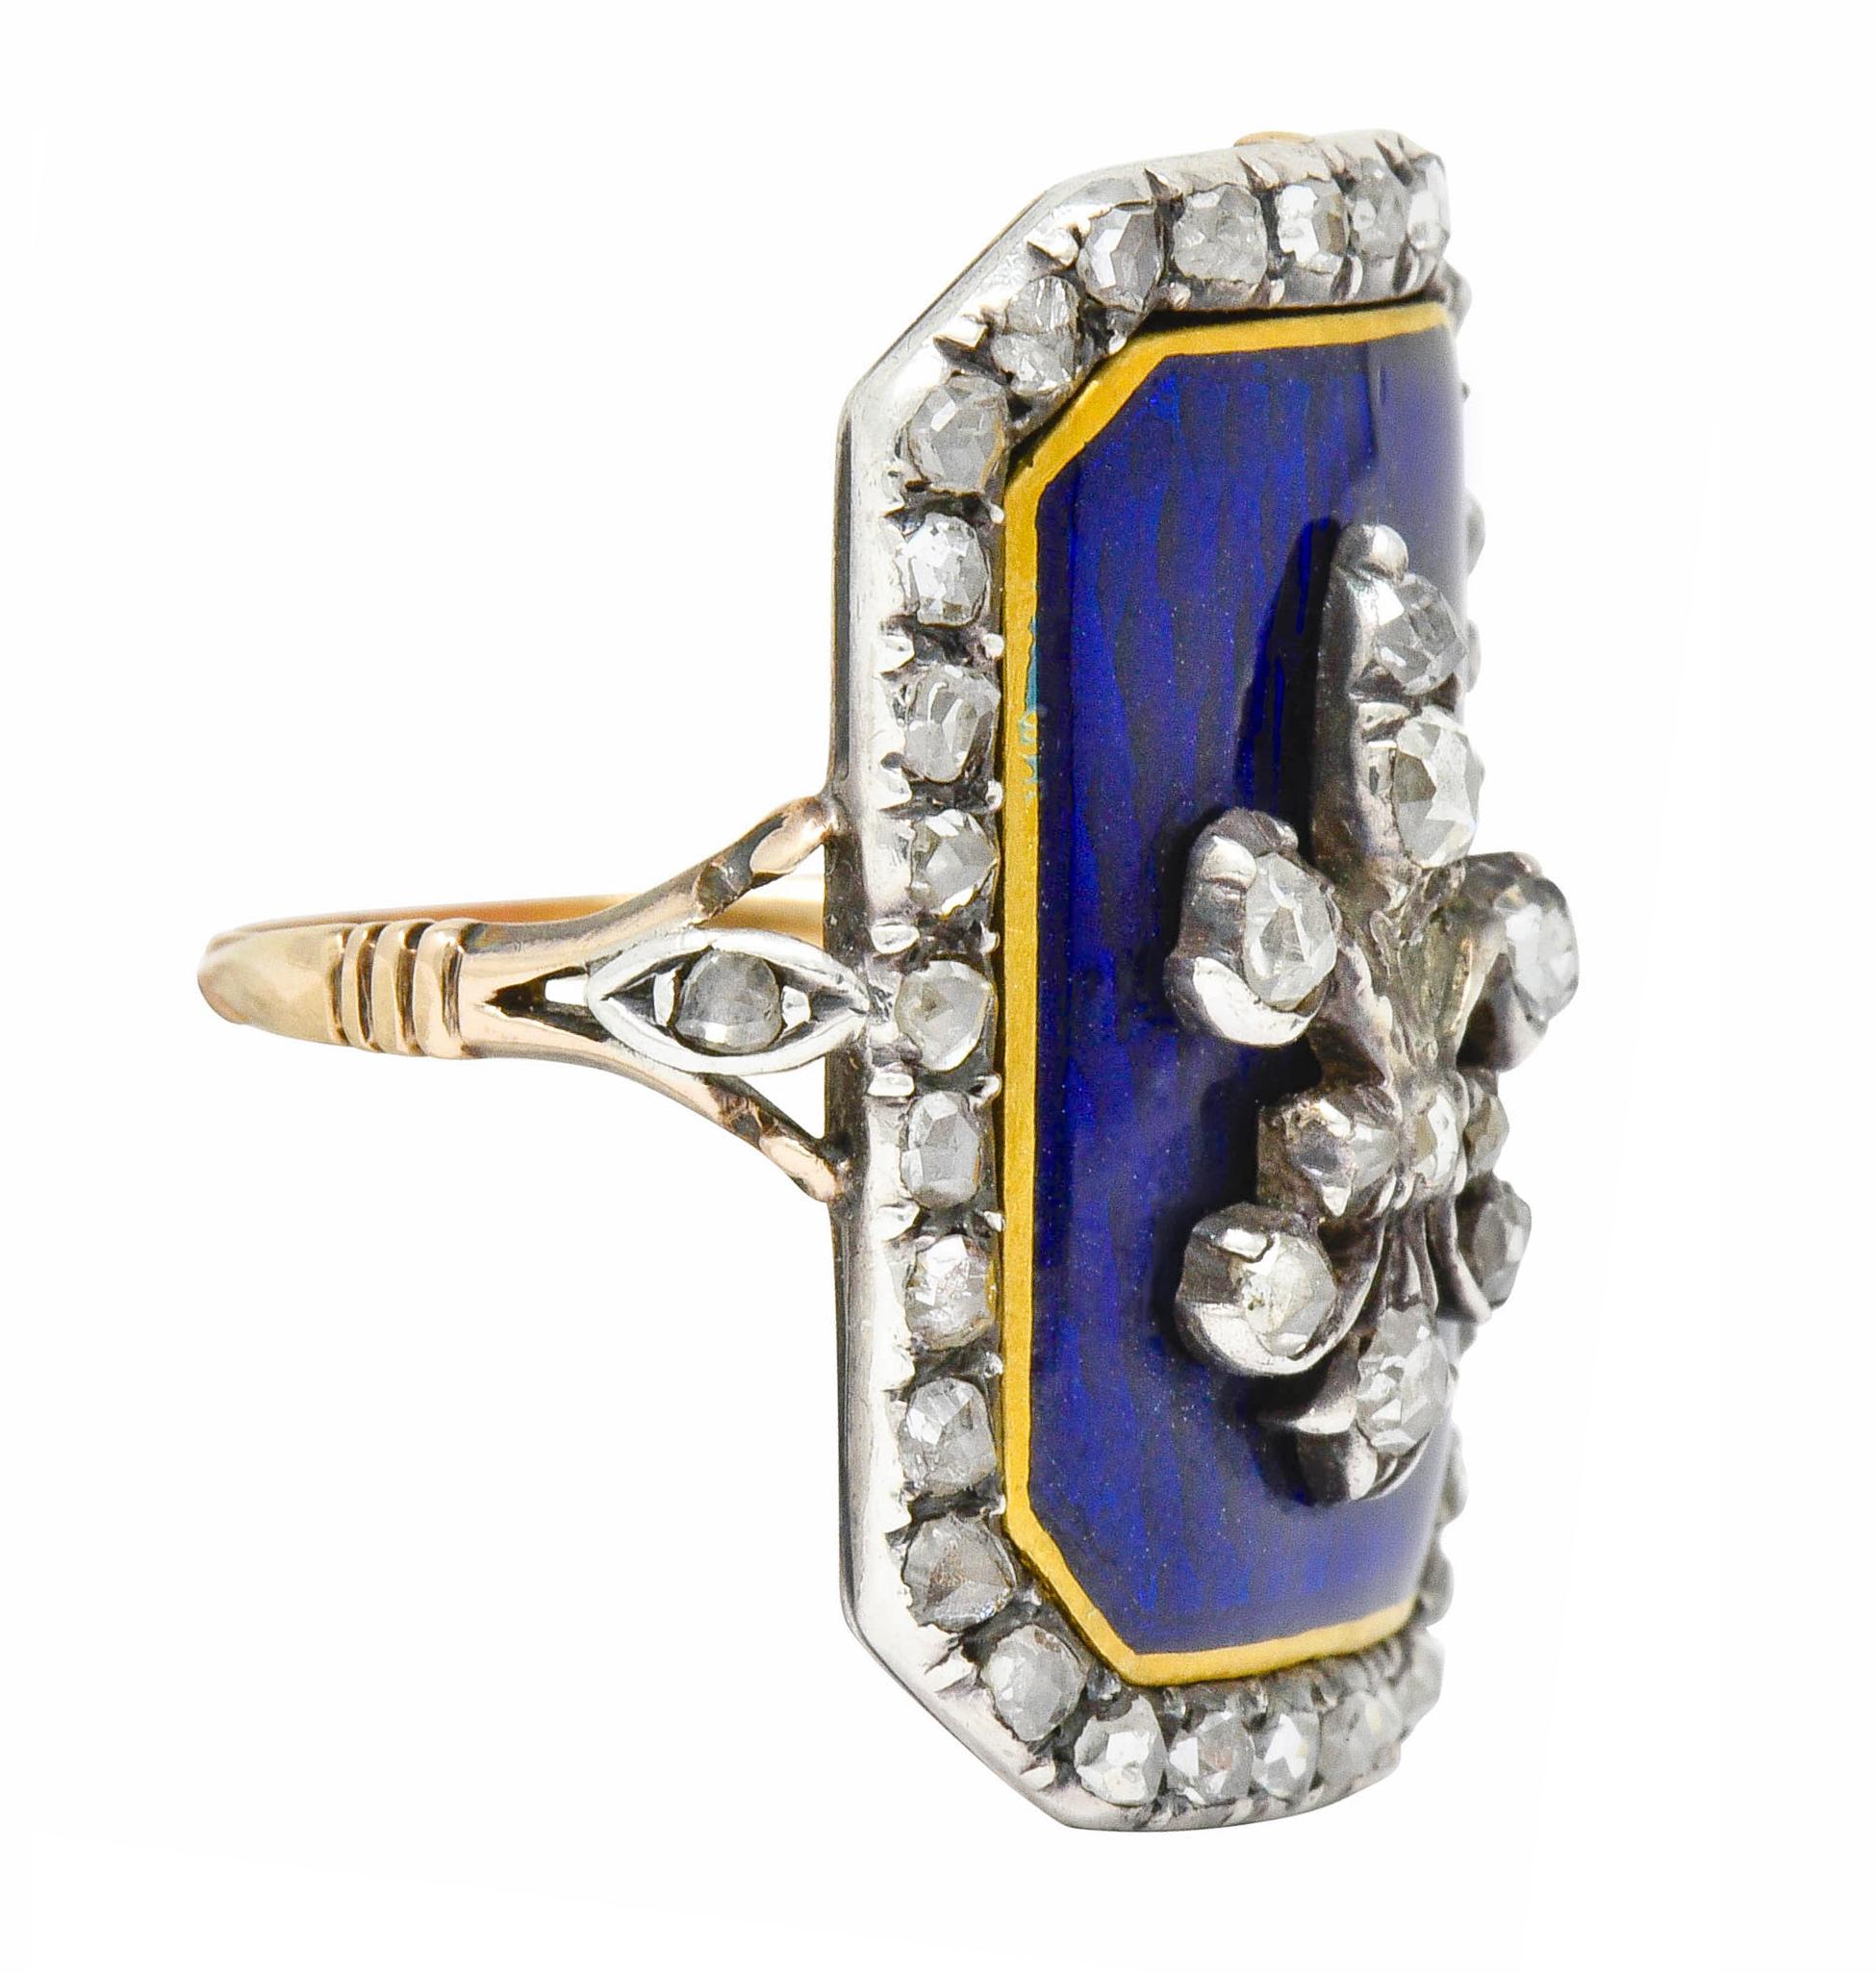 Statement ring designed as a rectangular mounting with a slight bow for a comfortable fit,

Centering a fleur-de-lis emblem with a bright royal blue enamel background with a gold enamel border; exhibiting no loss

Set throughout by rose cut diamonds